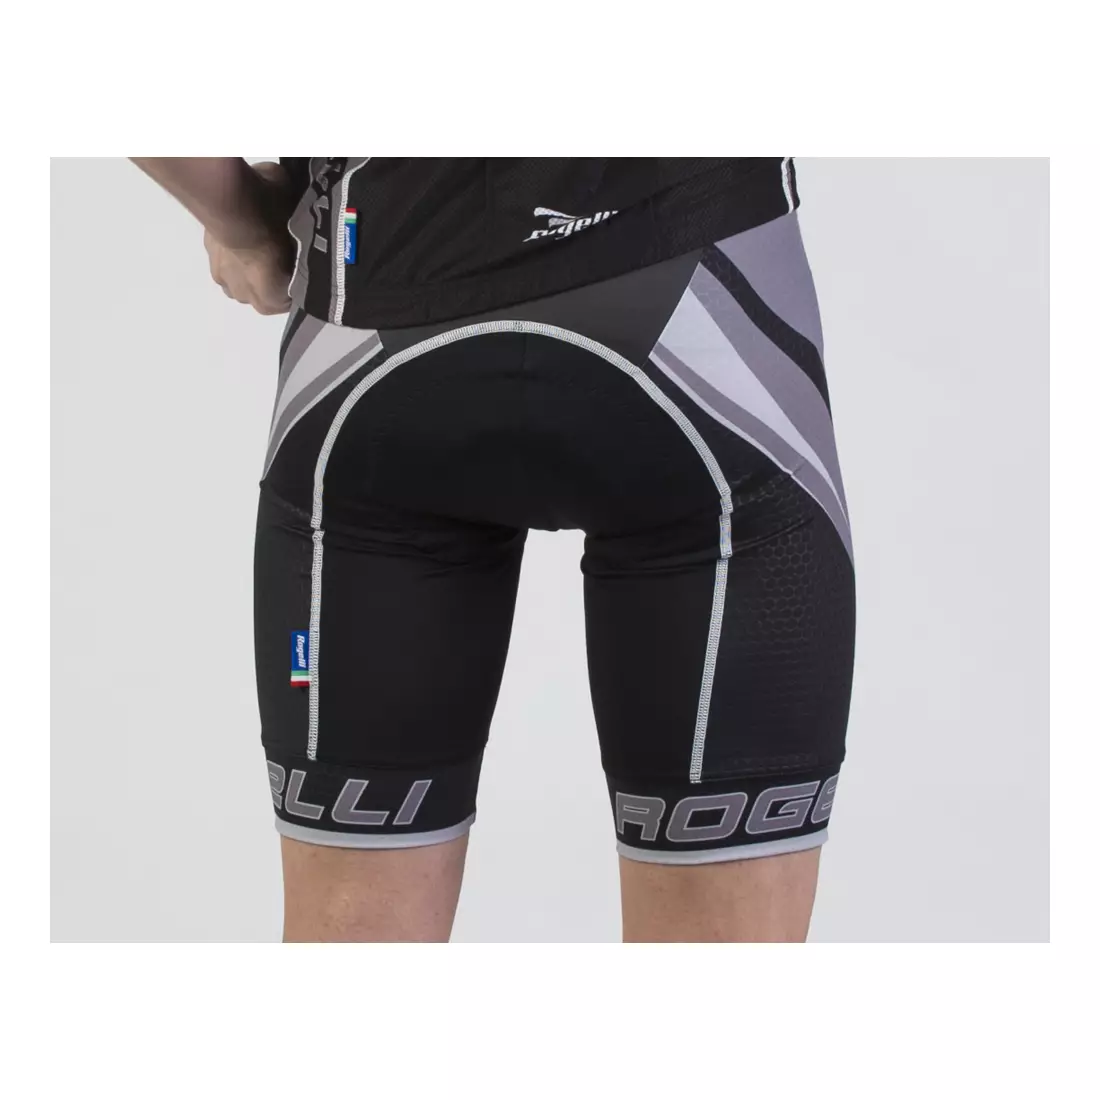 ROGELLI BIKE 002.254 ANDRANO 2.0 bicycle shorts, black and red